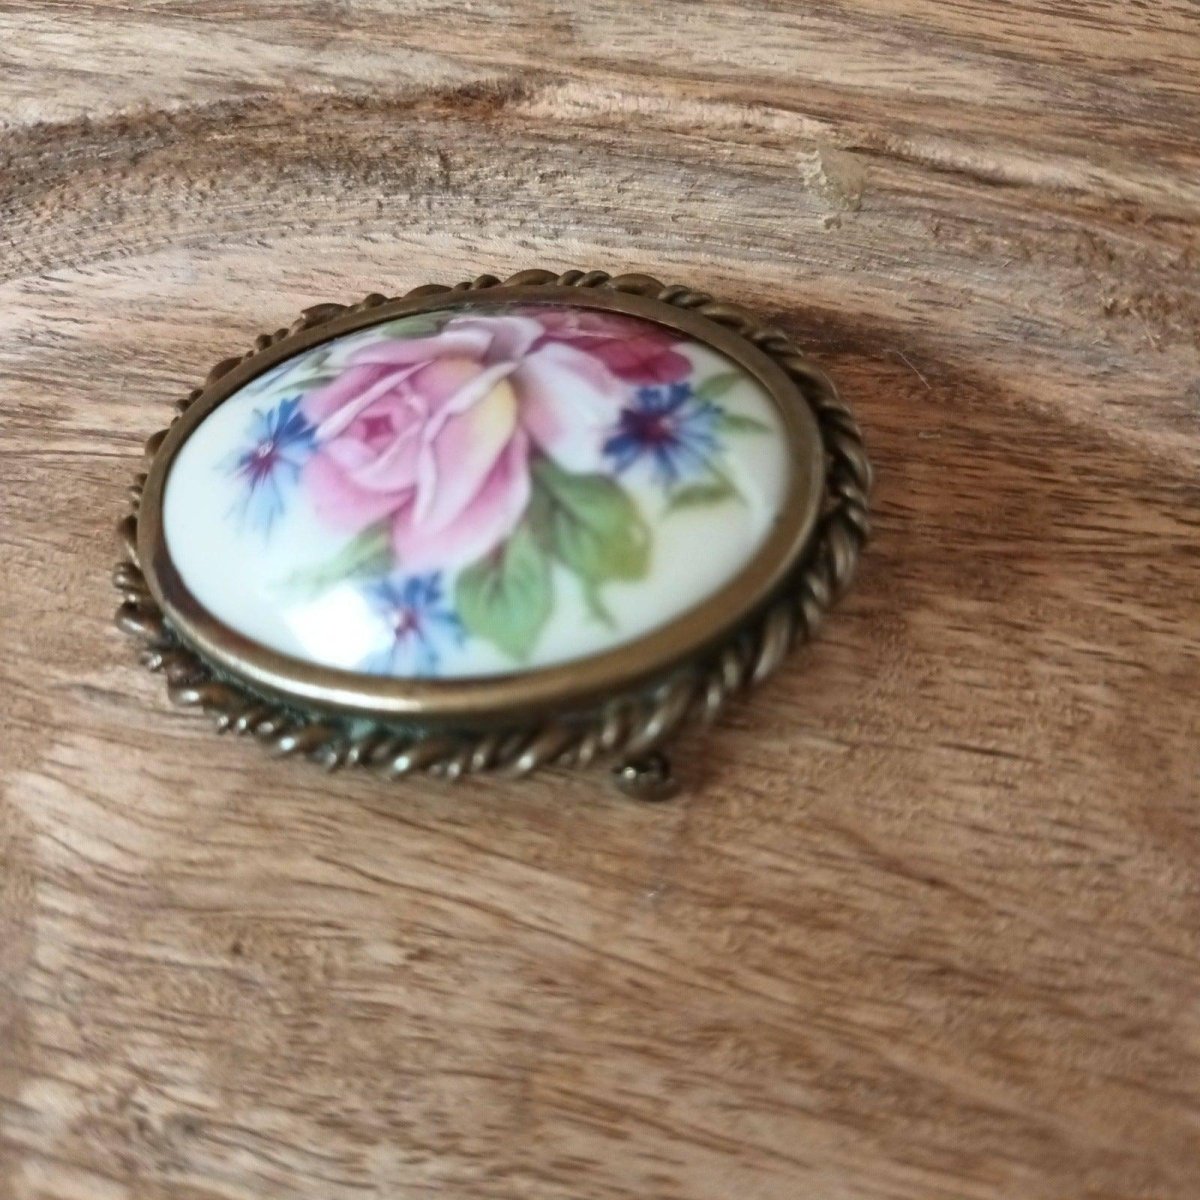 Vintage broche - Limoges France - Veilingcoach.be